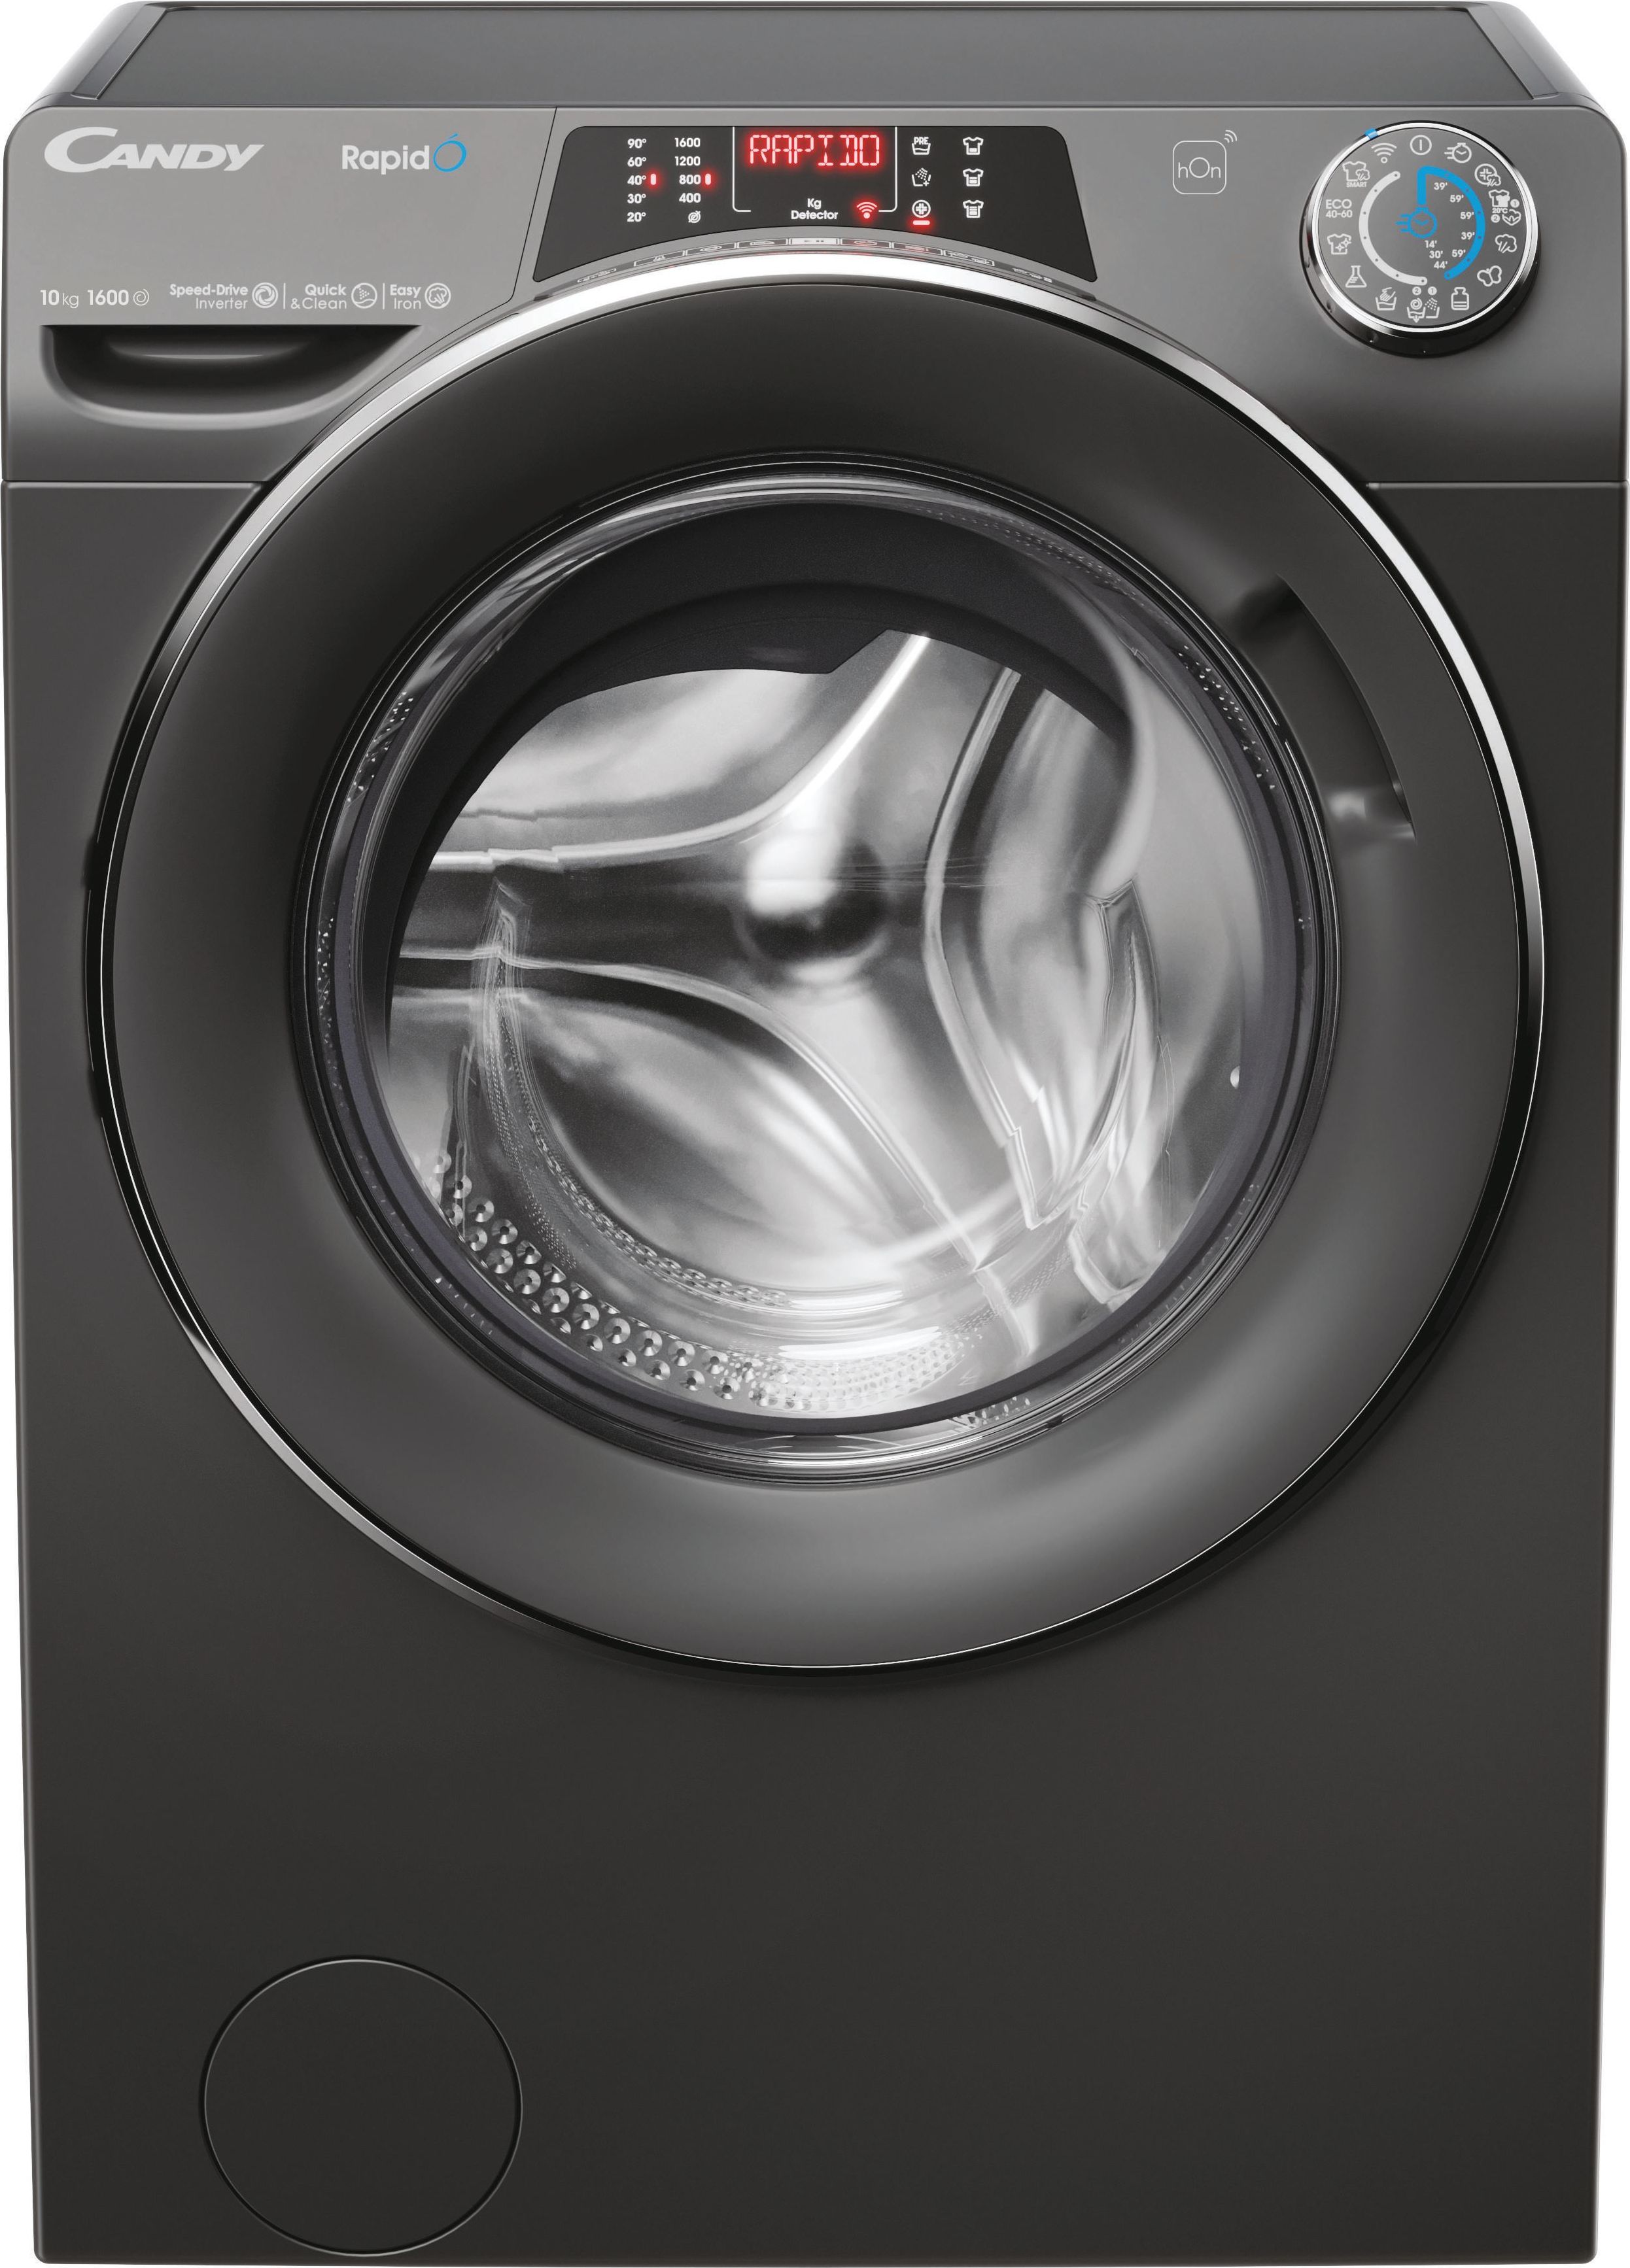 Candy Rapid RO16106DWMCR7-80 10kg Washing Machine with 1600 rpm - Graphite - A Rated, Silver